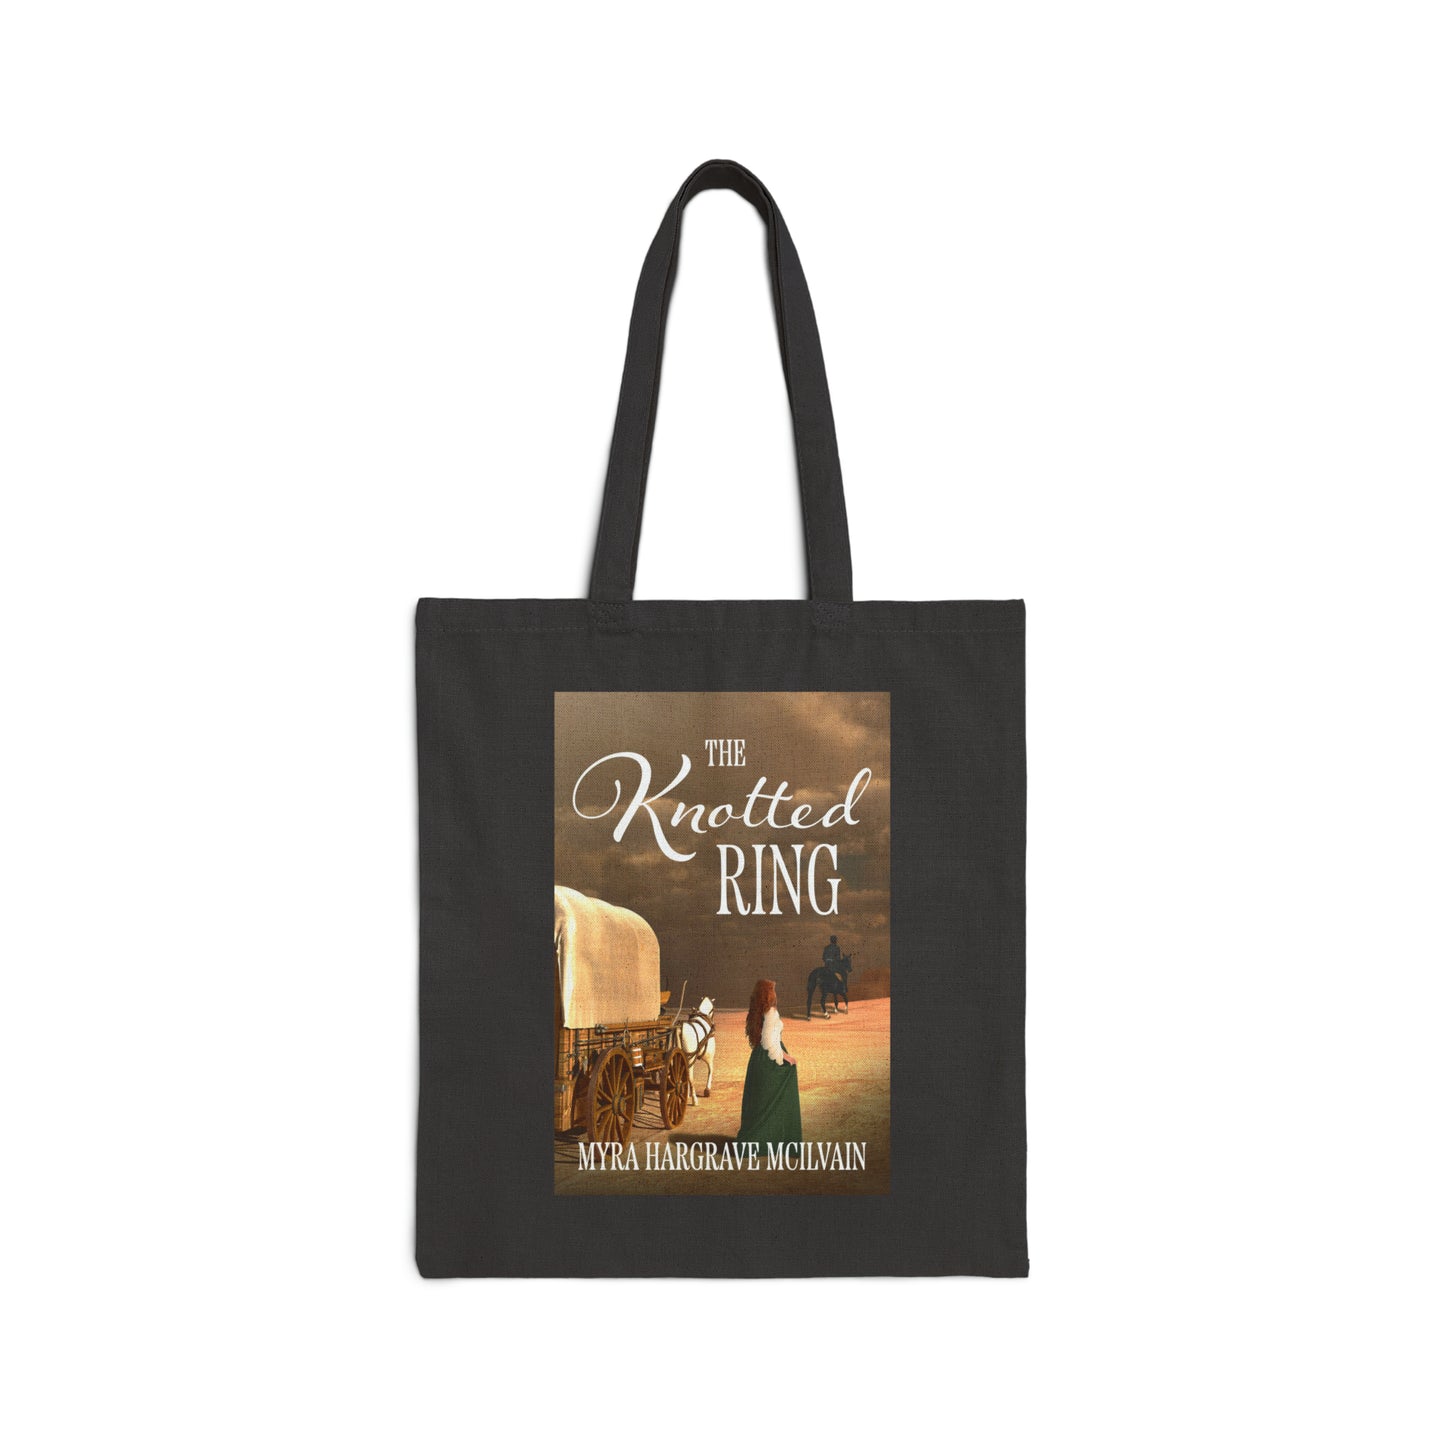 The Knotted Ring - Cotton Canvas Tote Bag